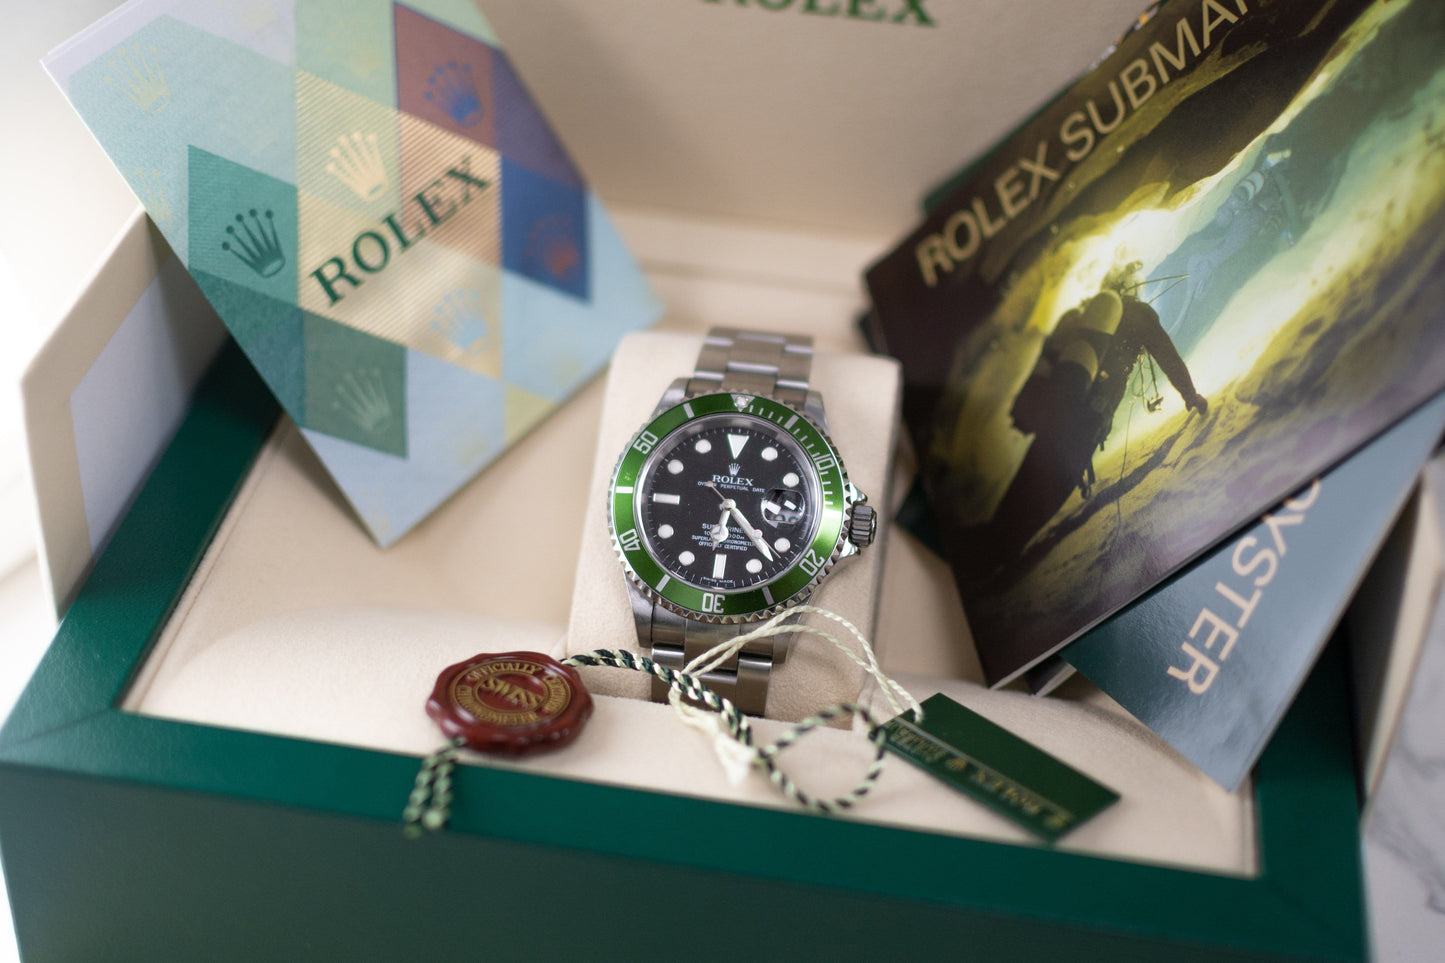 Rolex 16610LV Submariner Date - Pre-owned Luxury Watches